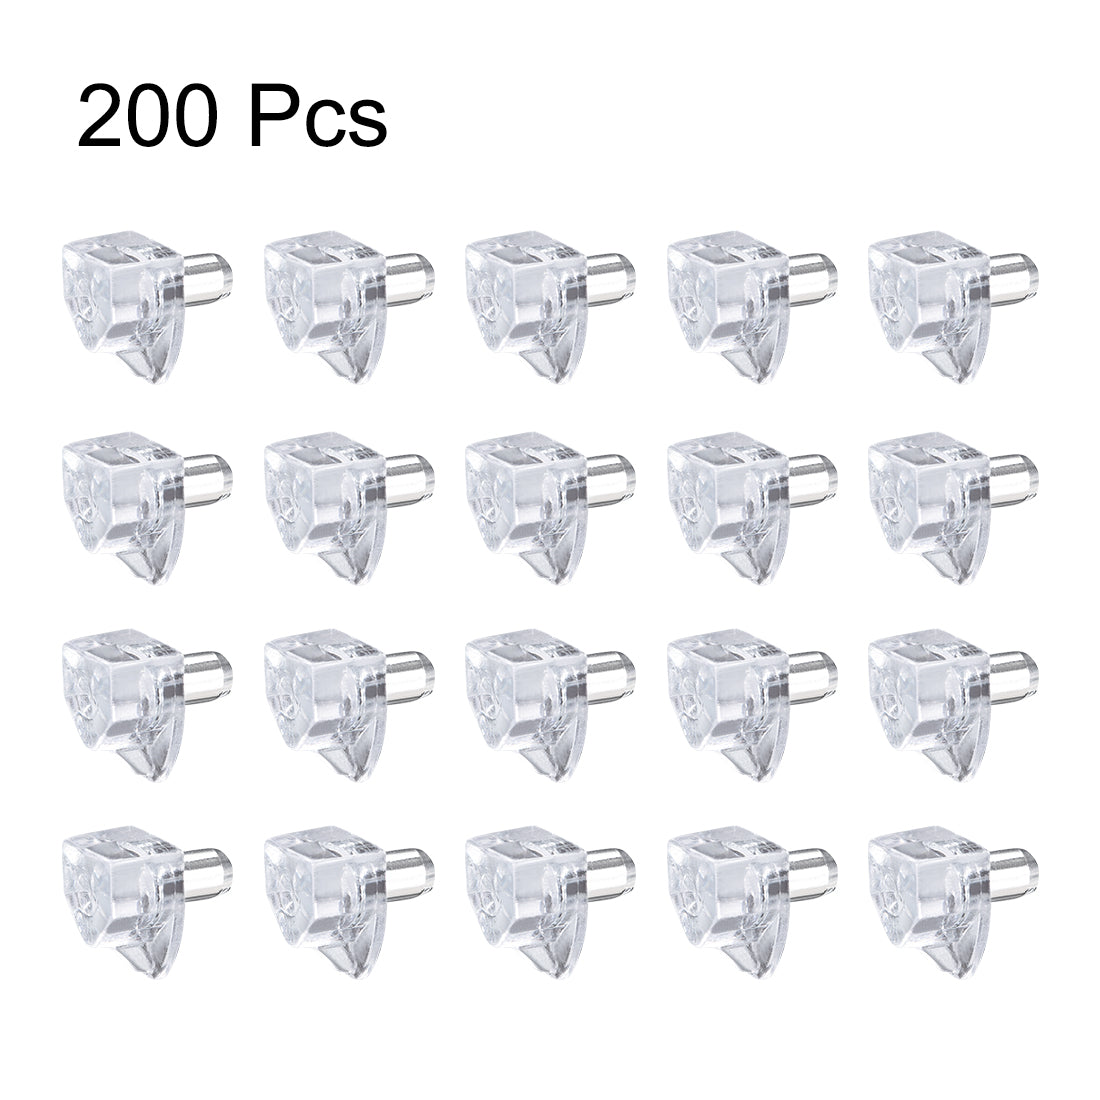 uxcell Uxcell 200pcs Plastic Shelf Support Pegs,5mm Cabinet Shelf Clips,Shelf Steel Pin Peg,Clear Bracket Style,for Kitchen Furniture Book Shelves Supplies